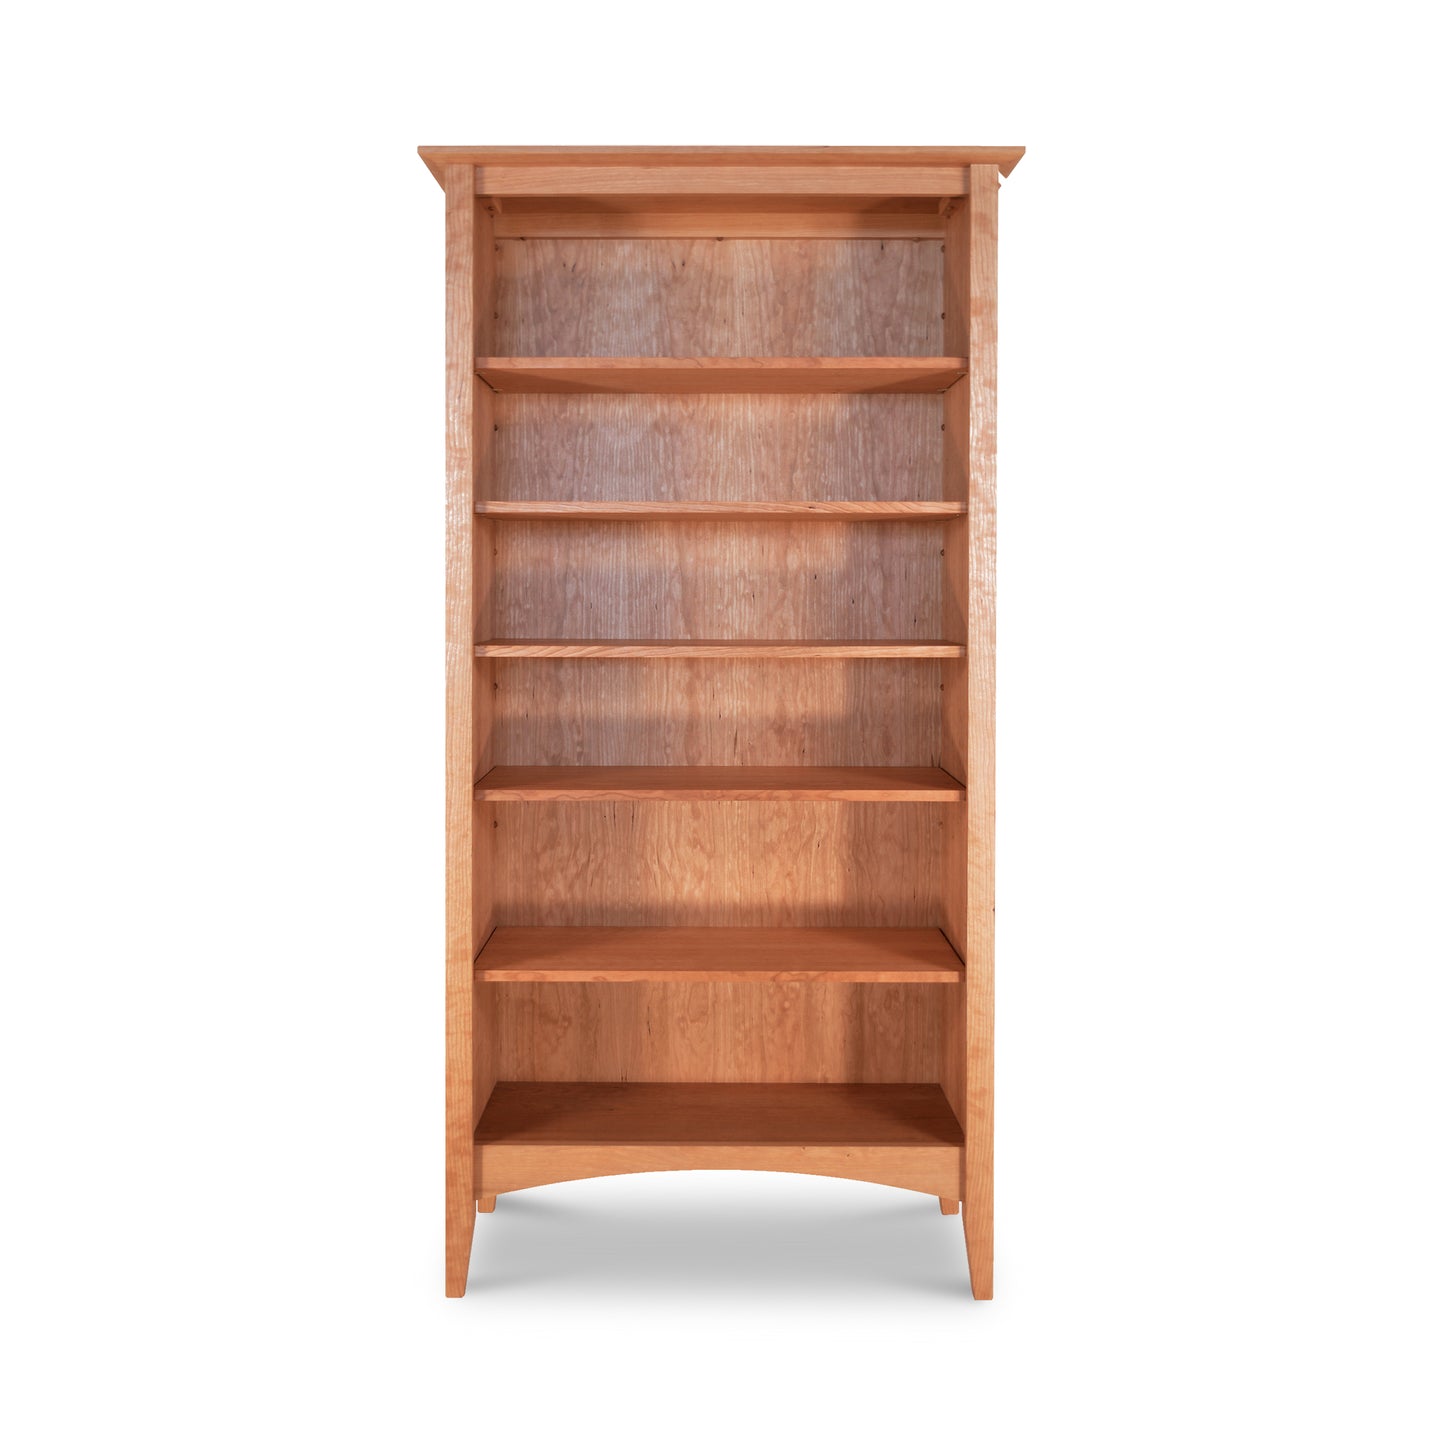 A sustainably harvested American Shaker Bookcase, showcasing a Maple Corner Woodworks design, placed on a pristine white background.